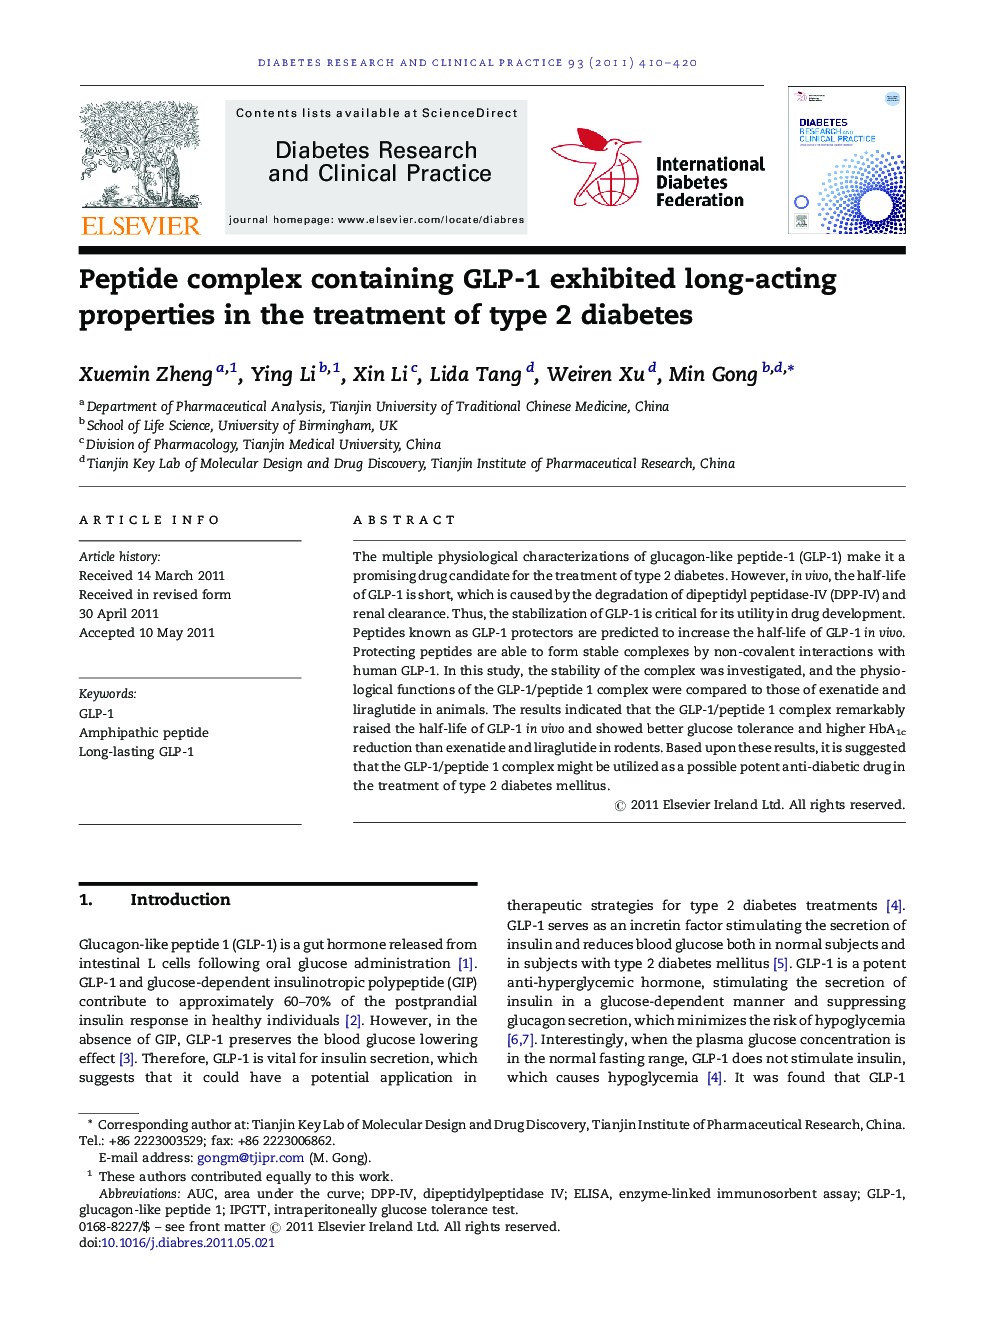 Peptide complex containing GLP-1 exhibited long-acting properties in the treatment of type 2 diabetes